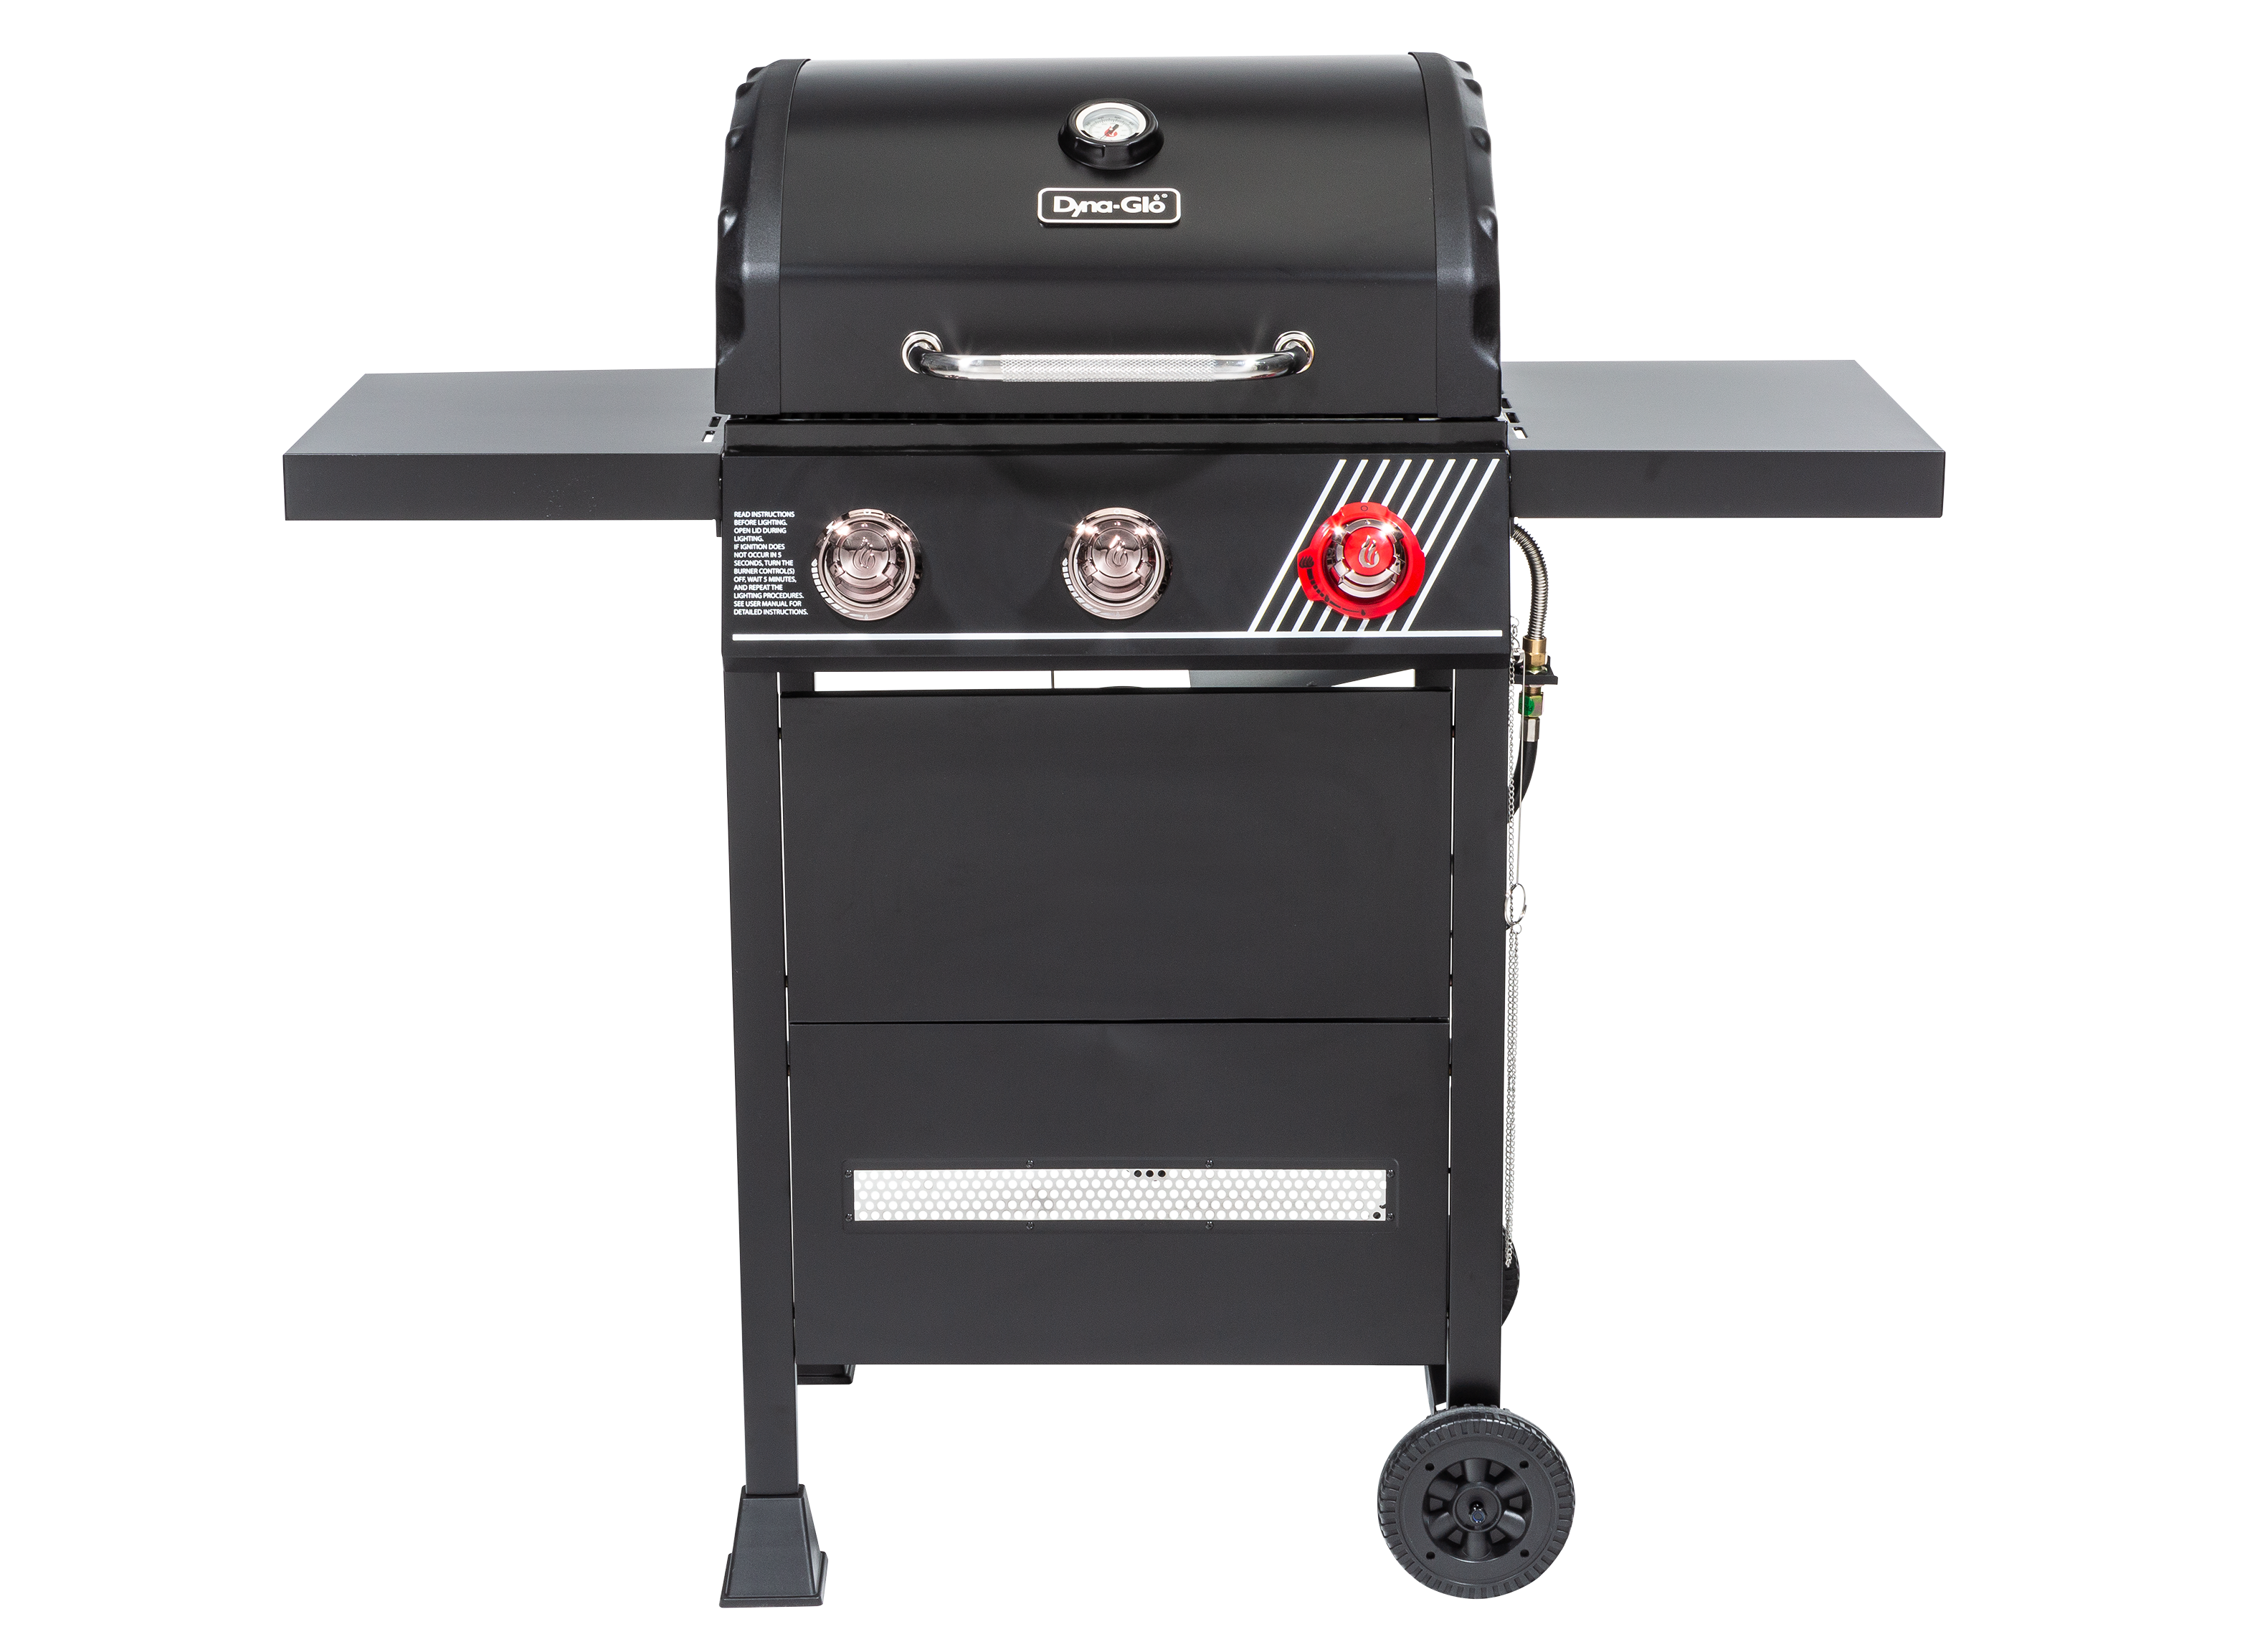 Dyna-Glo DGH353CRP Grill Review - Consumer Reports